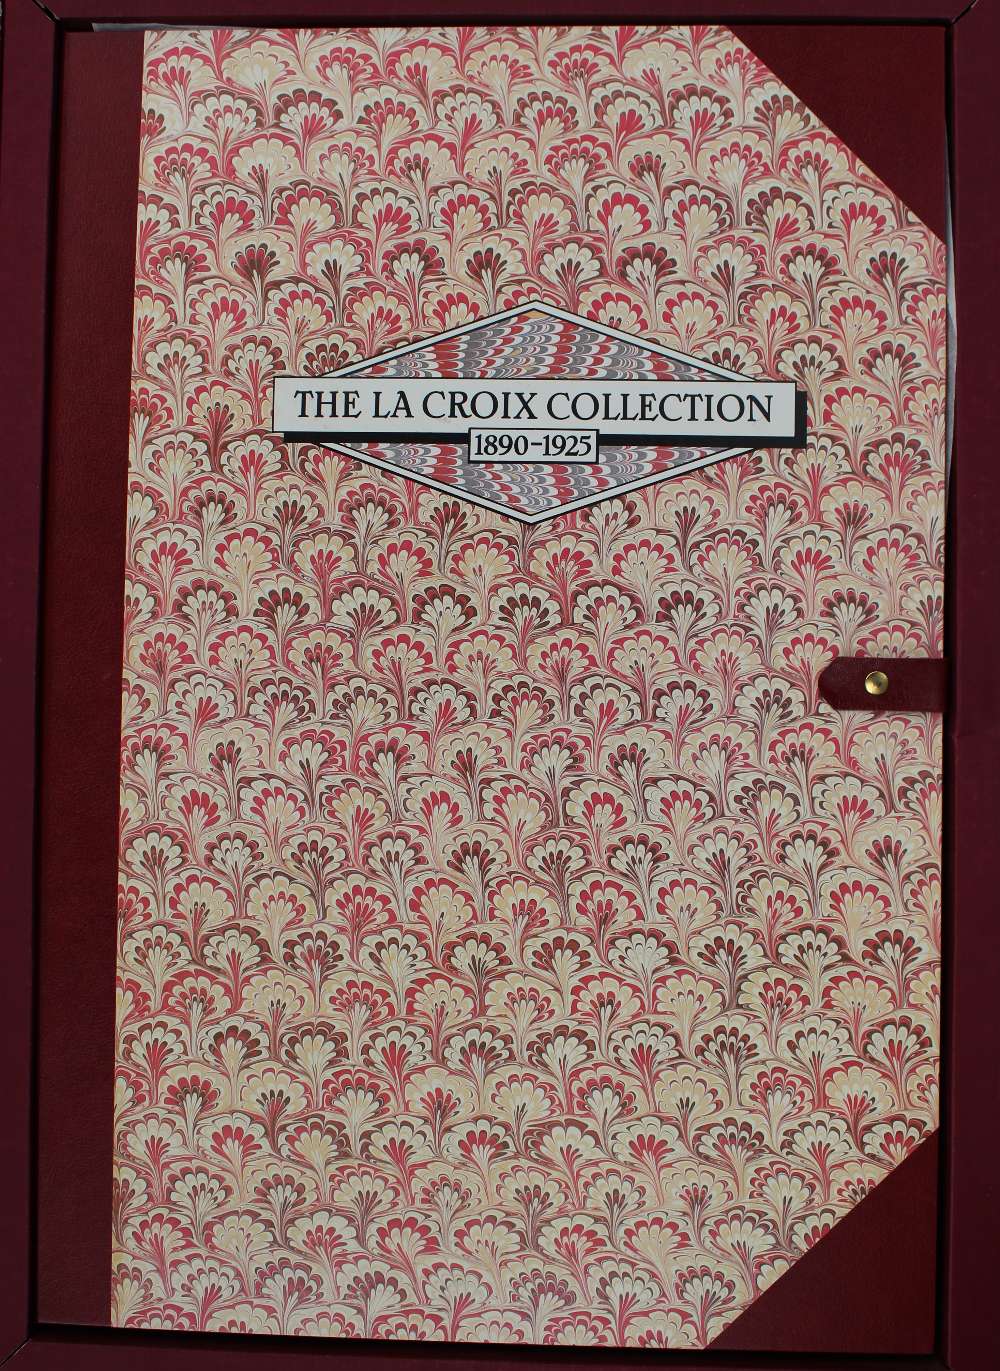 The La Croix Limited Edition Collection of Rizla Posters 1890-1925, large folio containing ten